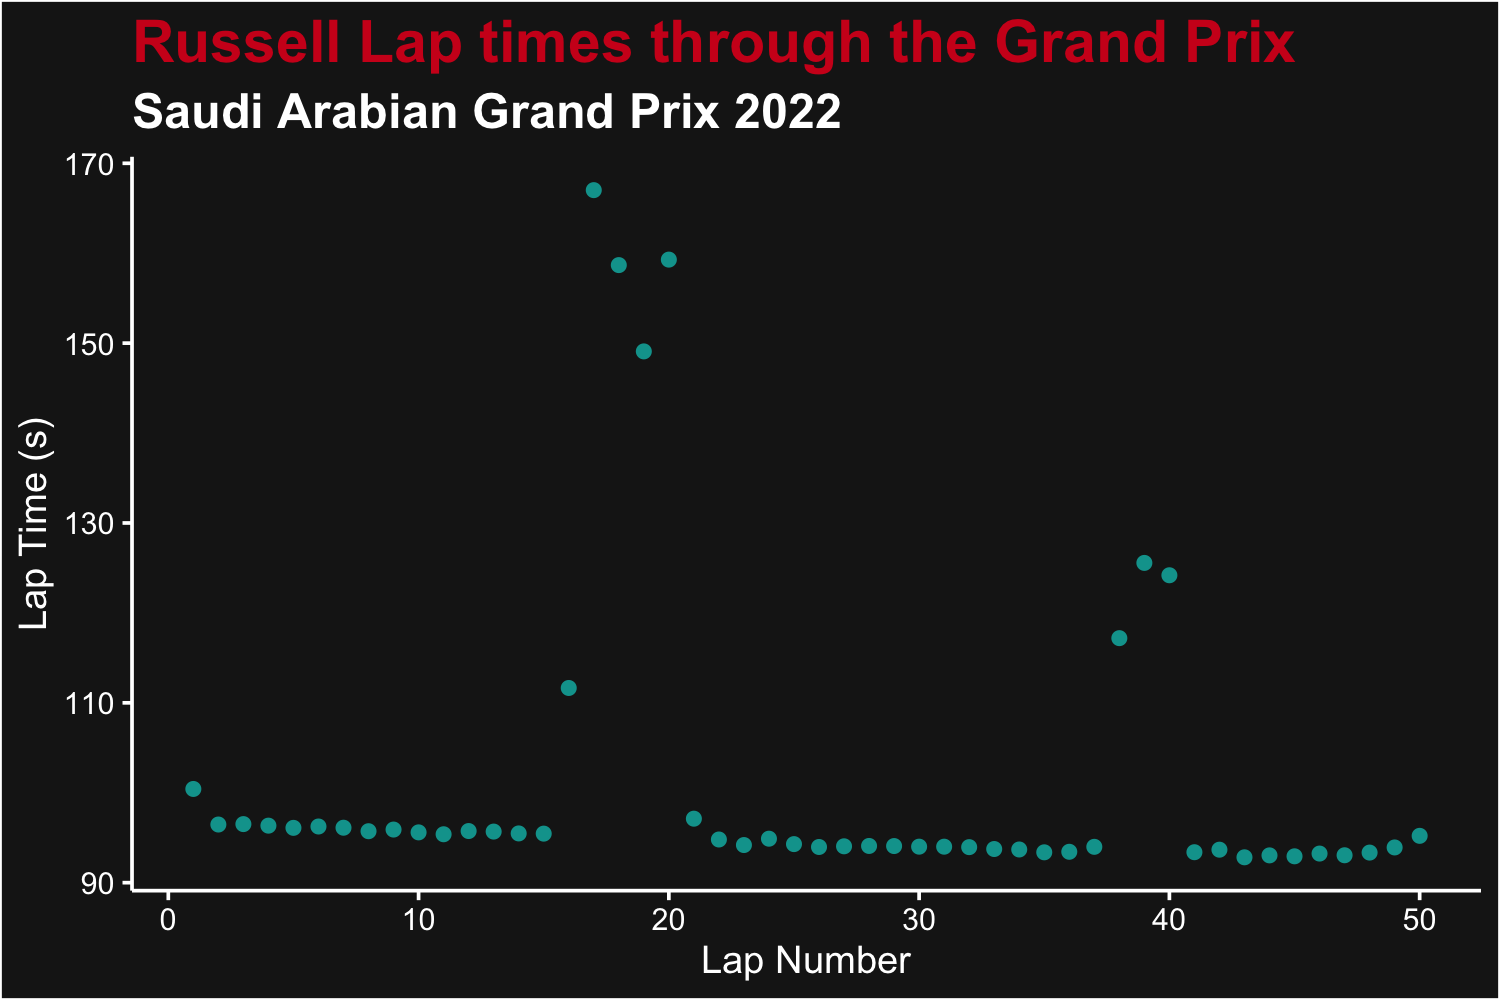 Laptimes for George Russell, for each lap from the 2022 Saudi Arabian Grand Prix